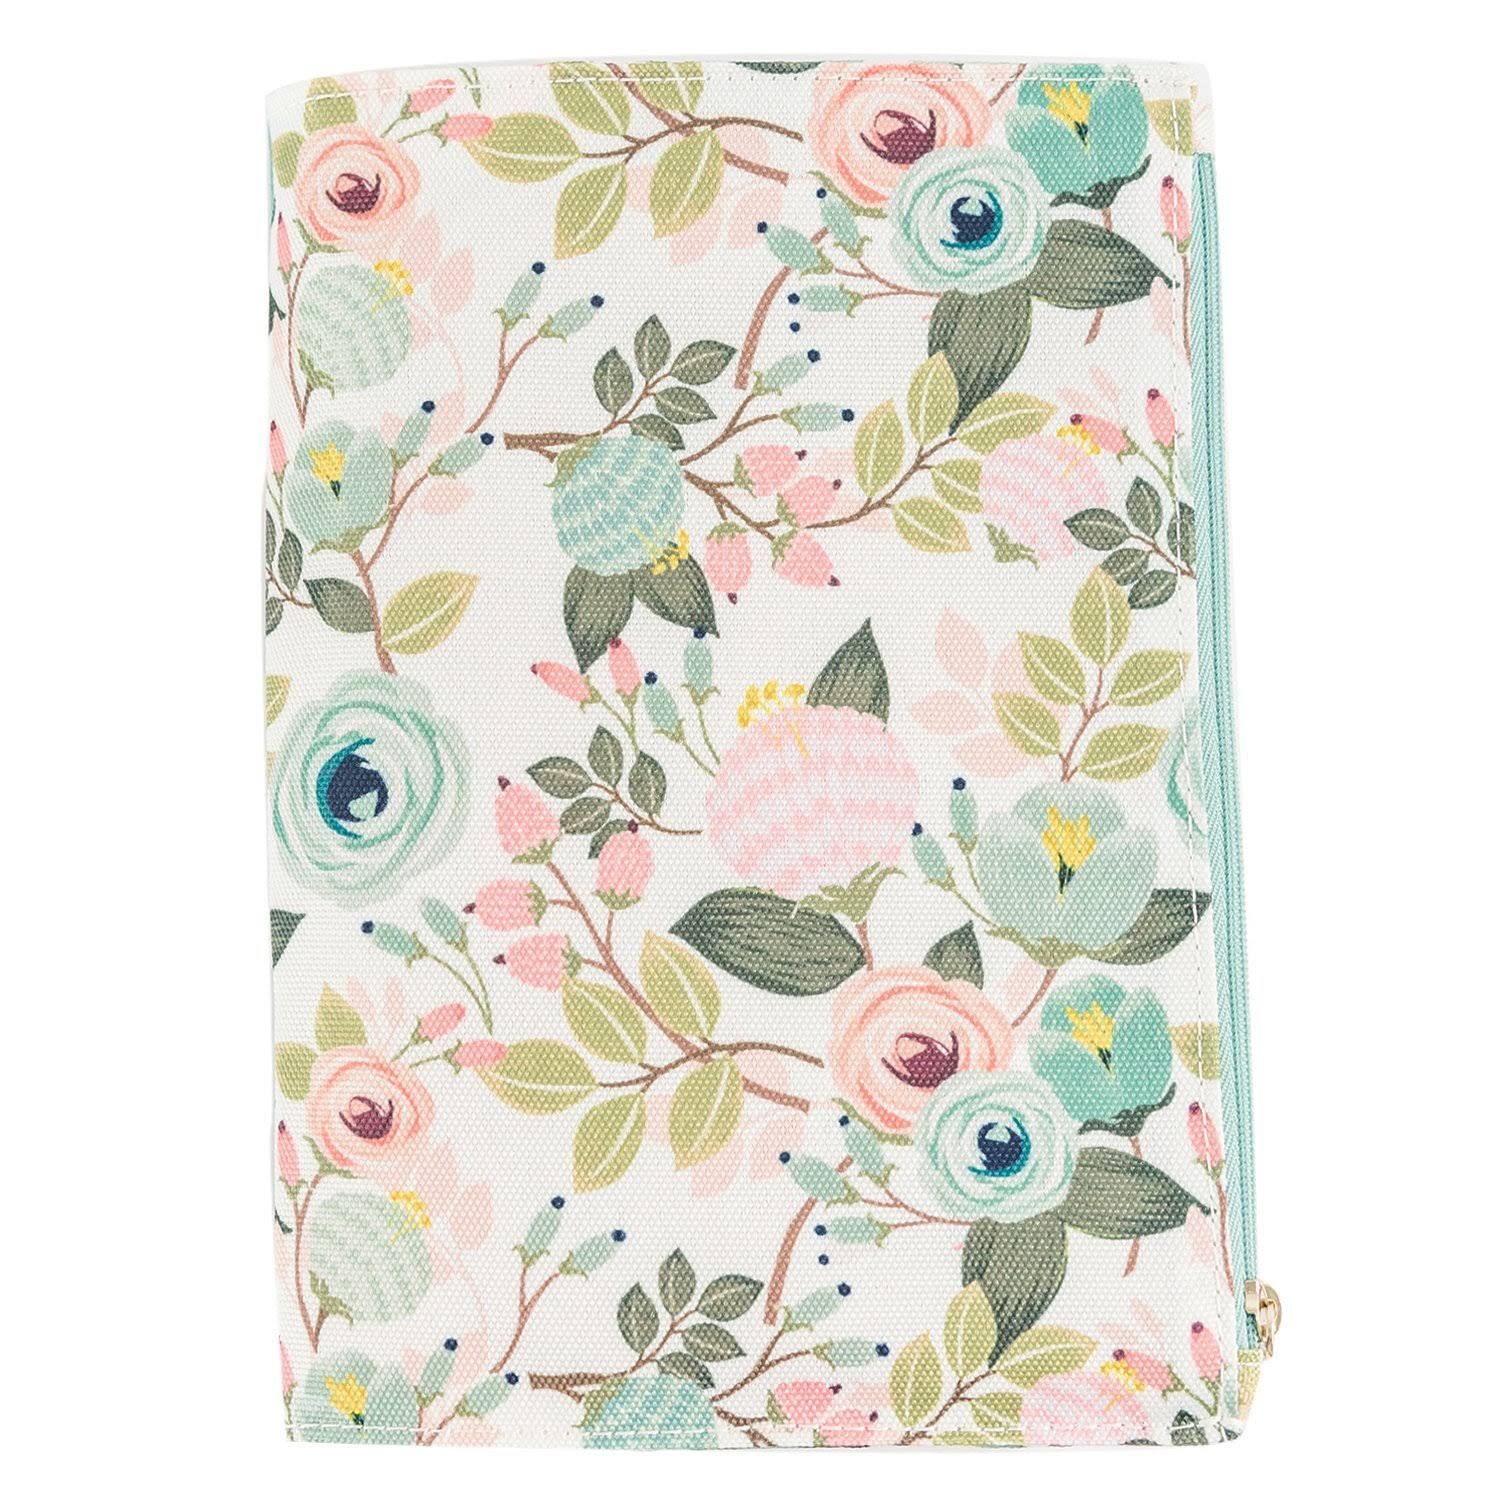 Mary Square Journal - Peach Floral